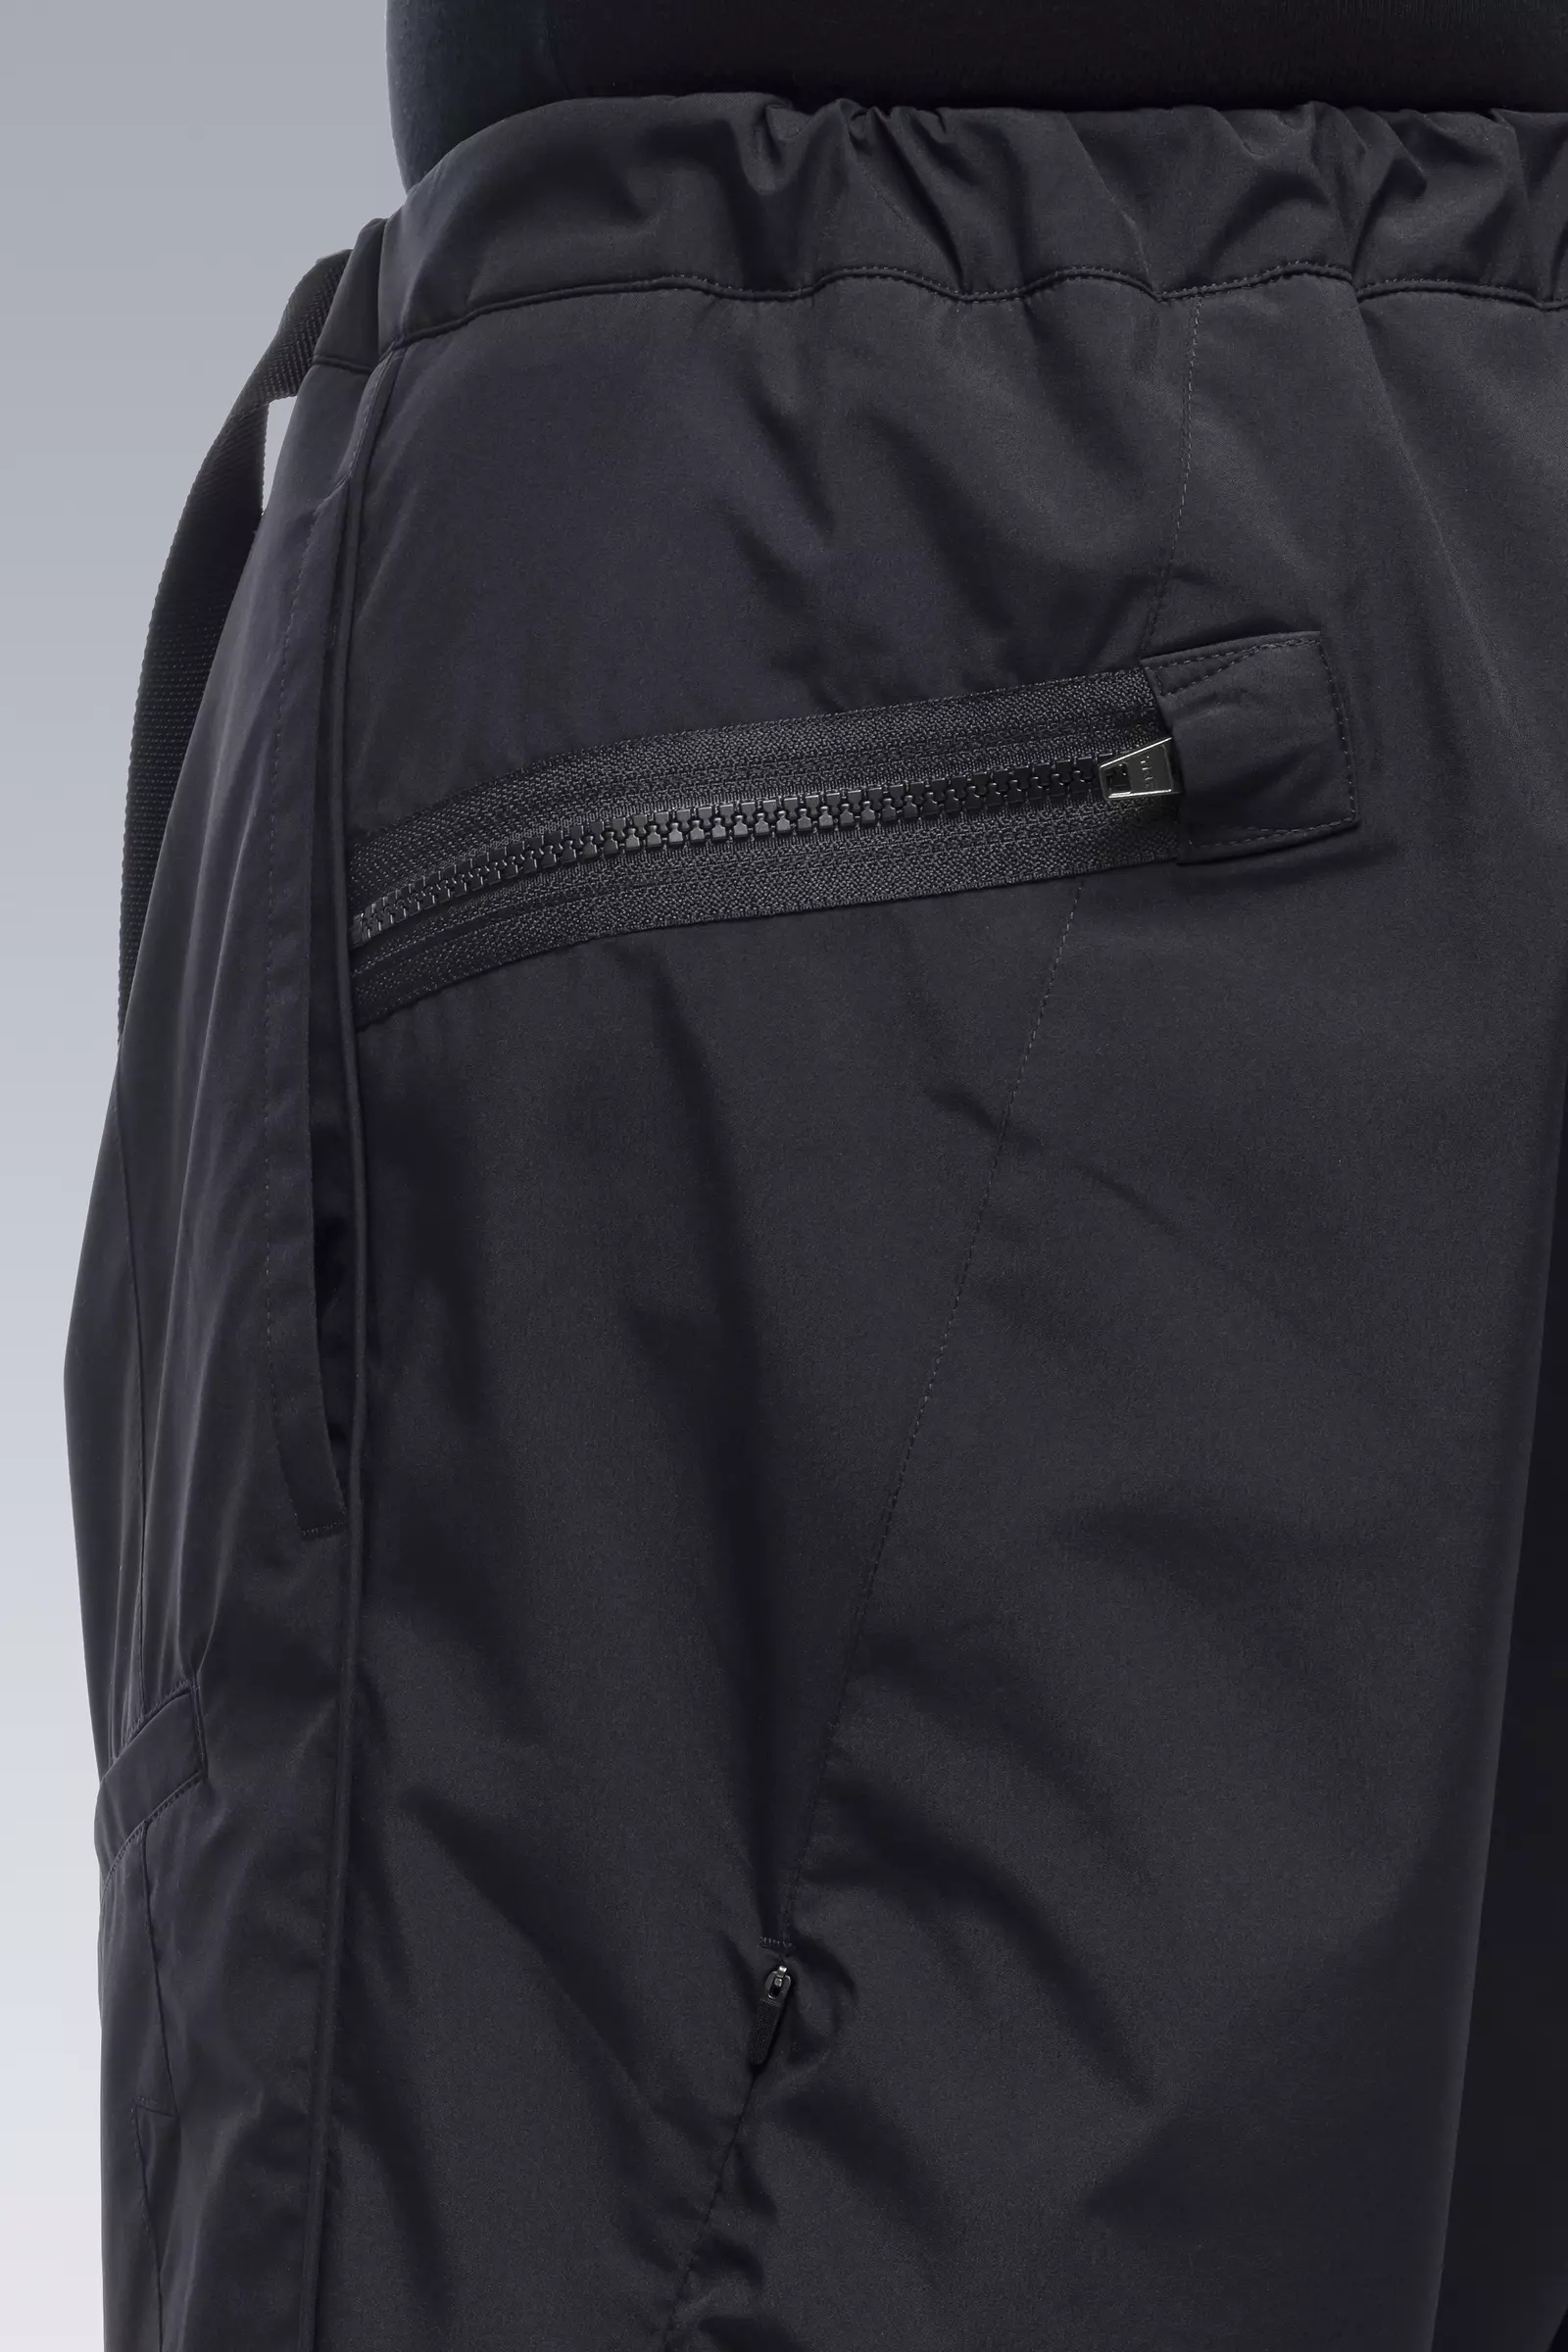 P53-WS 2L Gore-Tex® Windstopper® Insulated Vent Pants Black - 20